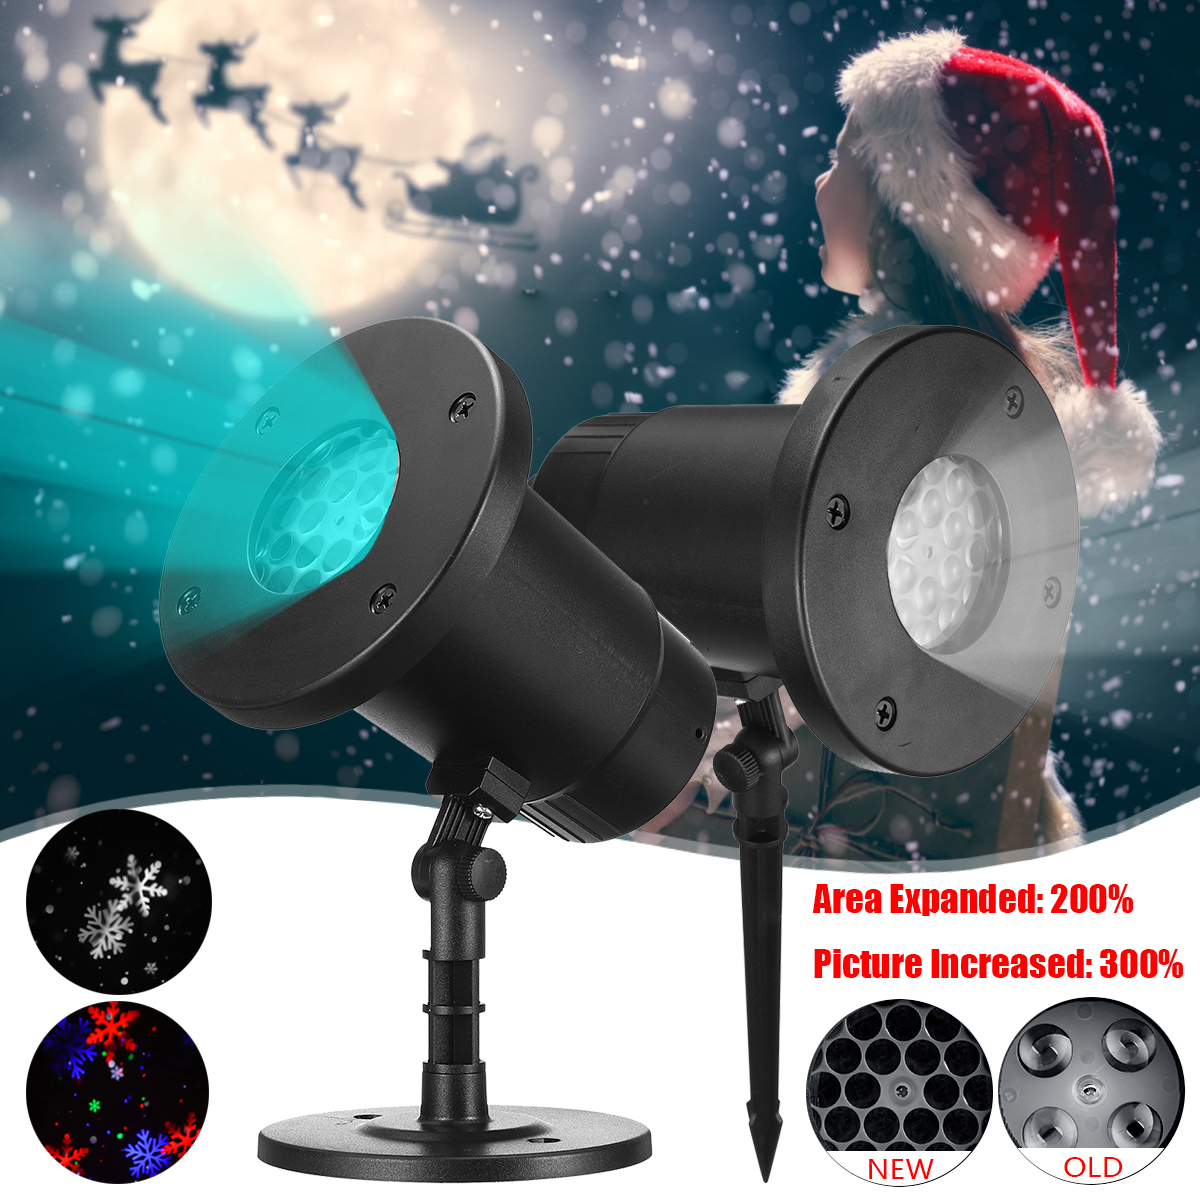 Portable-IP65-Waterproof-WhiteColorful-Snowflakes-Projector-Lamp-Outdoor-Work-Light-Landscape-Light--1605854-2